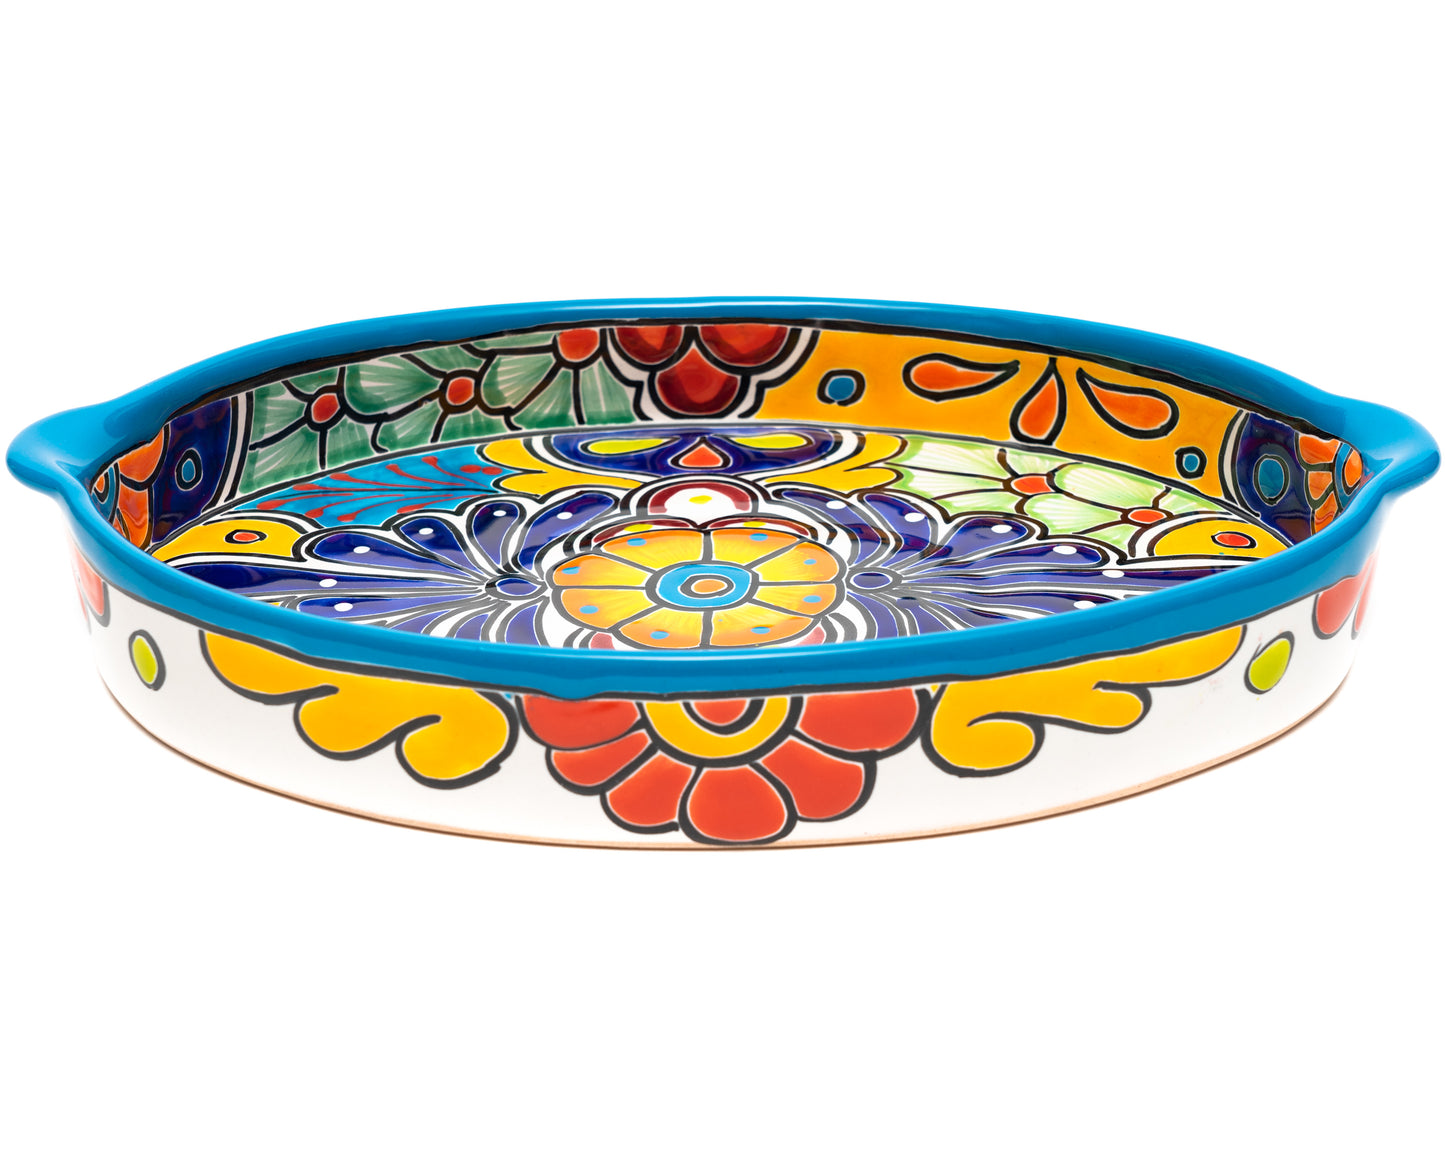 Oval Tray With Handles - Large - Turquoise